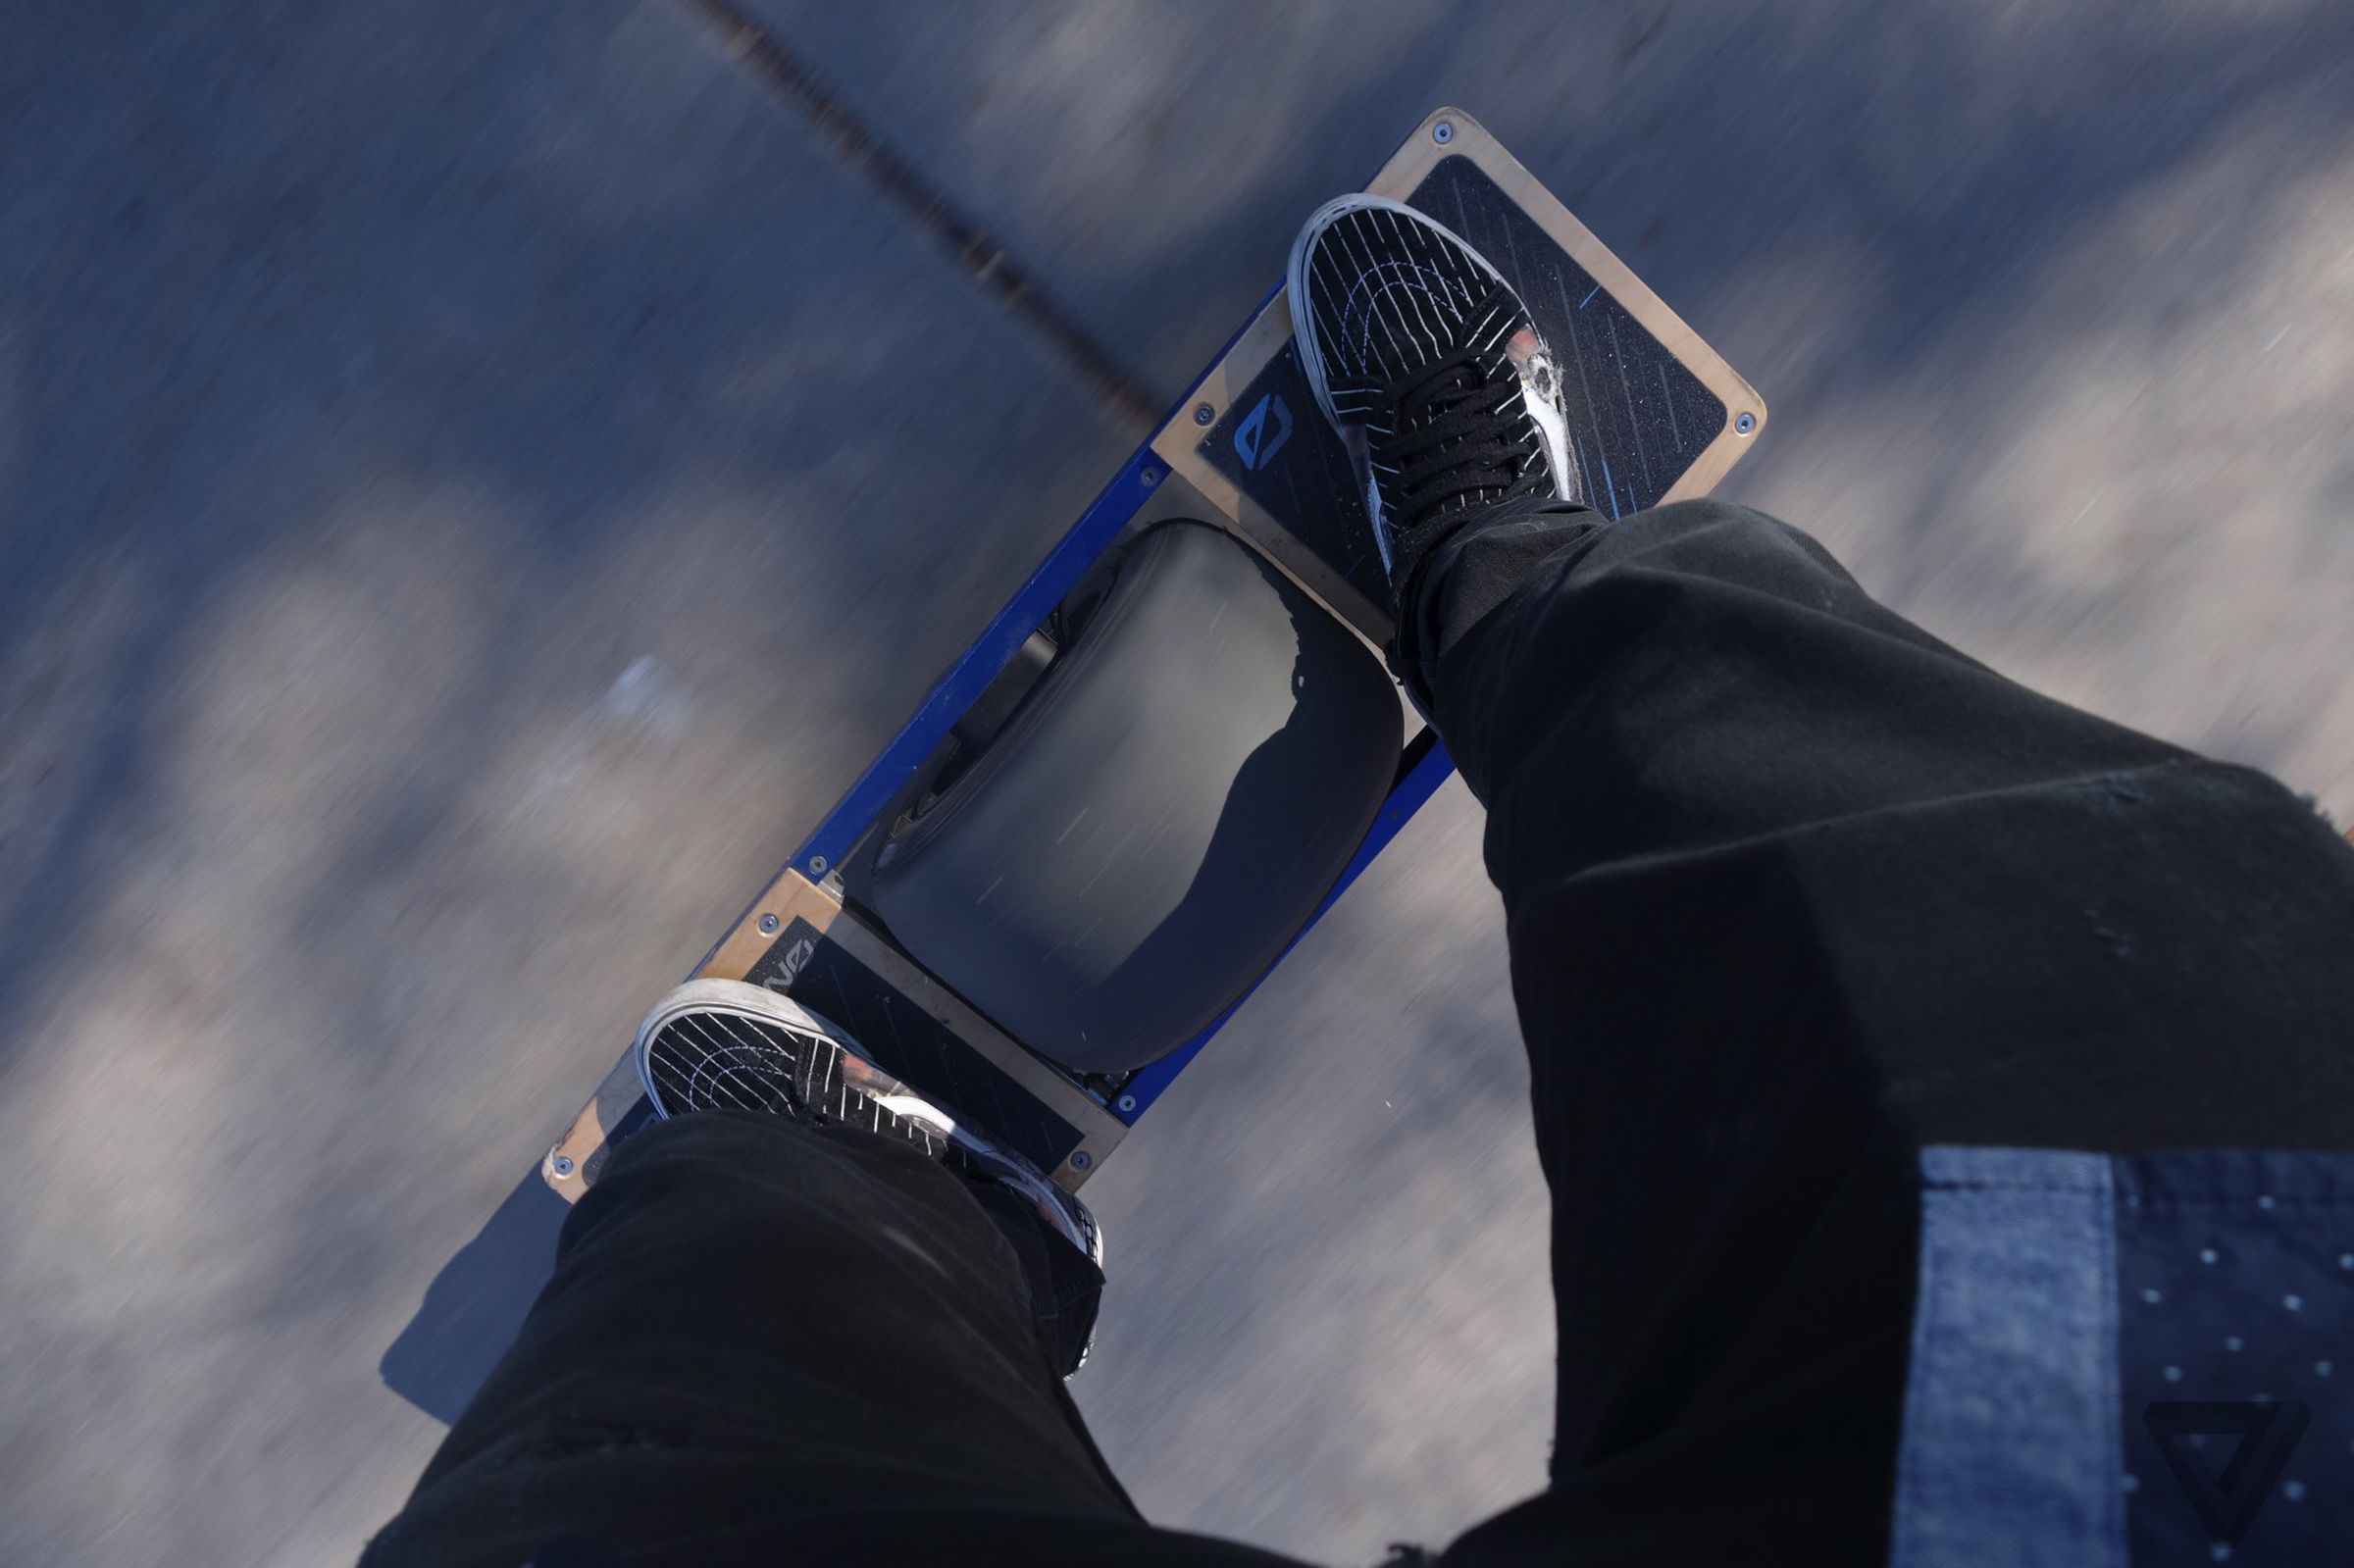 Onewheel hands-on CES 2015